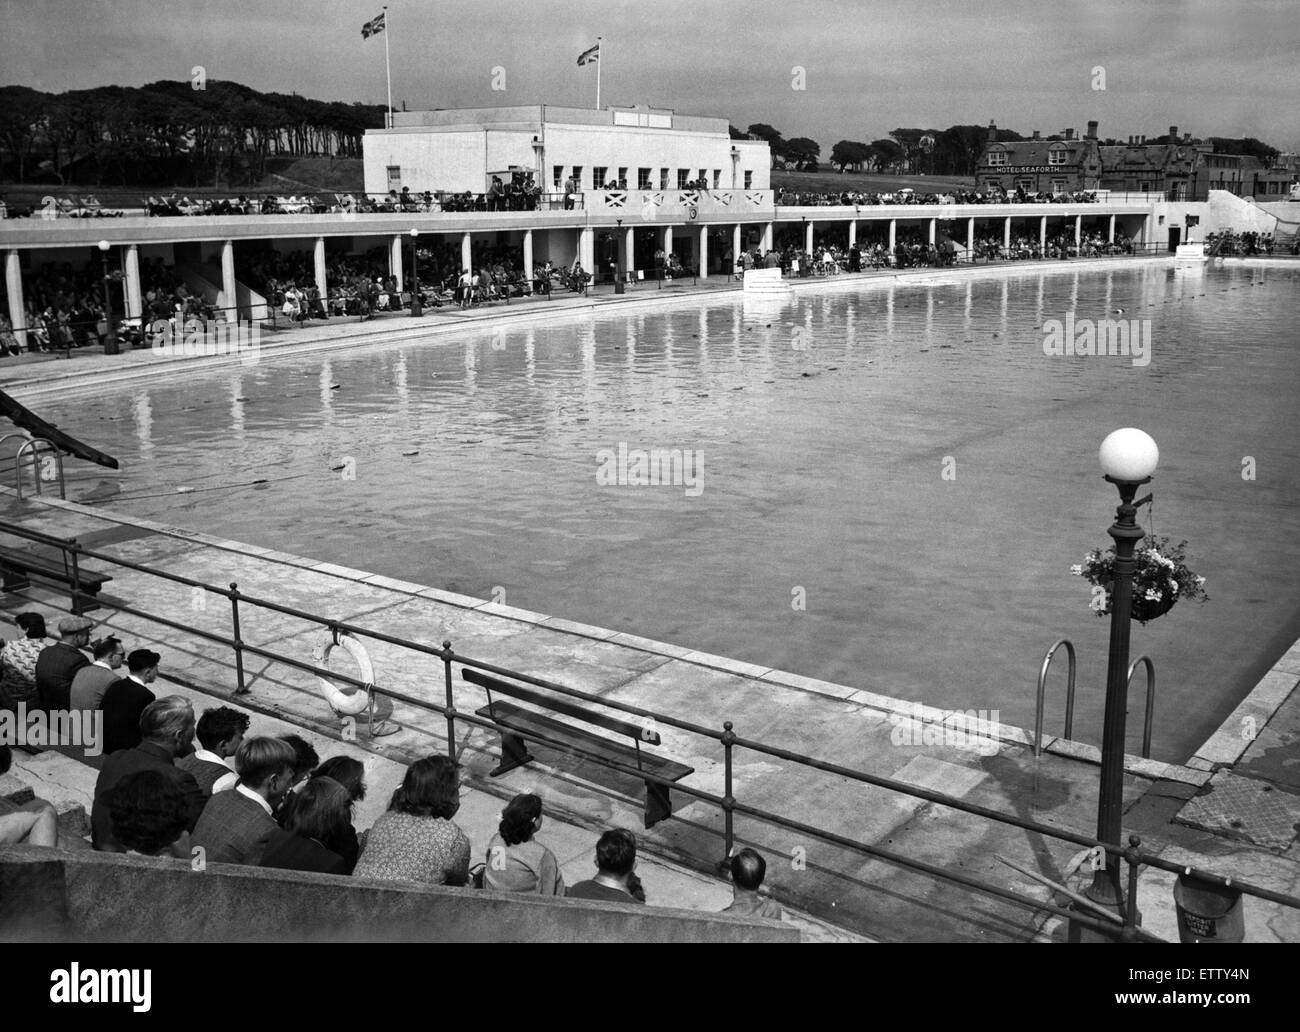 General view of Arbroath Swimming pool in Angus, Scotland. August 1951  Stock Photo - Alamy